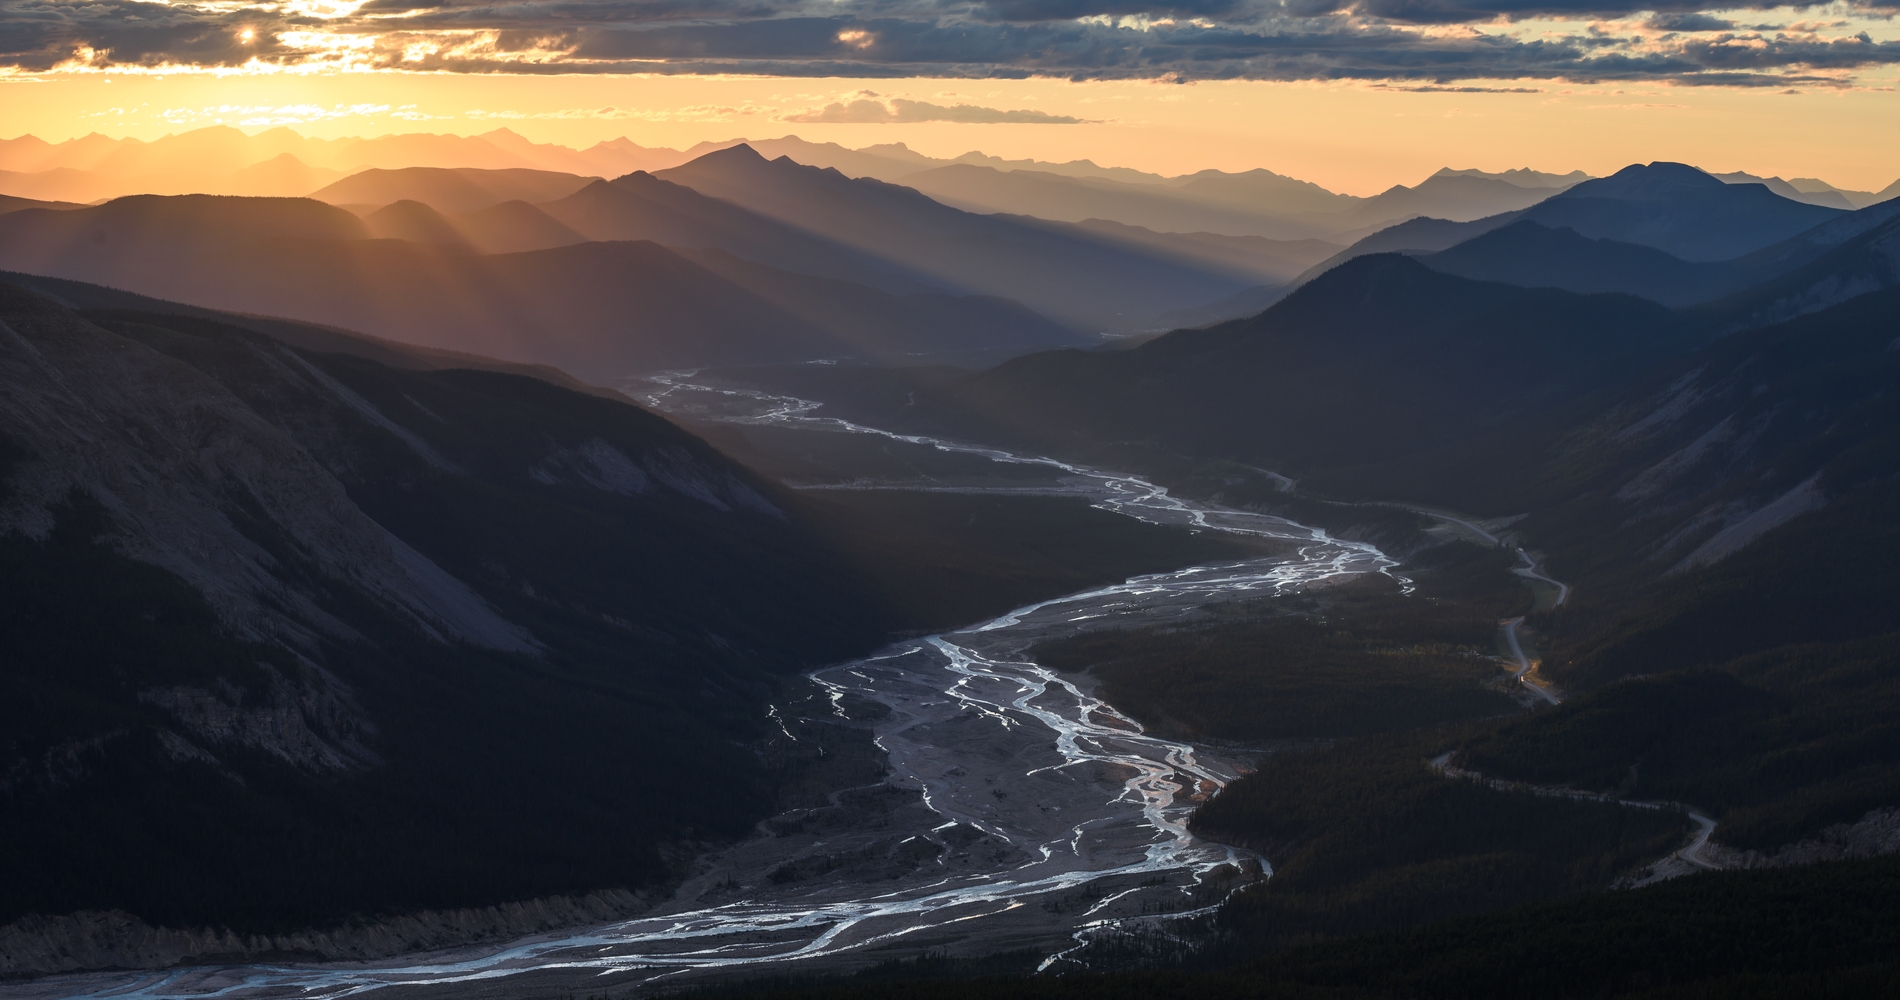 A meandering series of river streams run through a valley at sunset surrounded by mountains